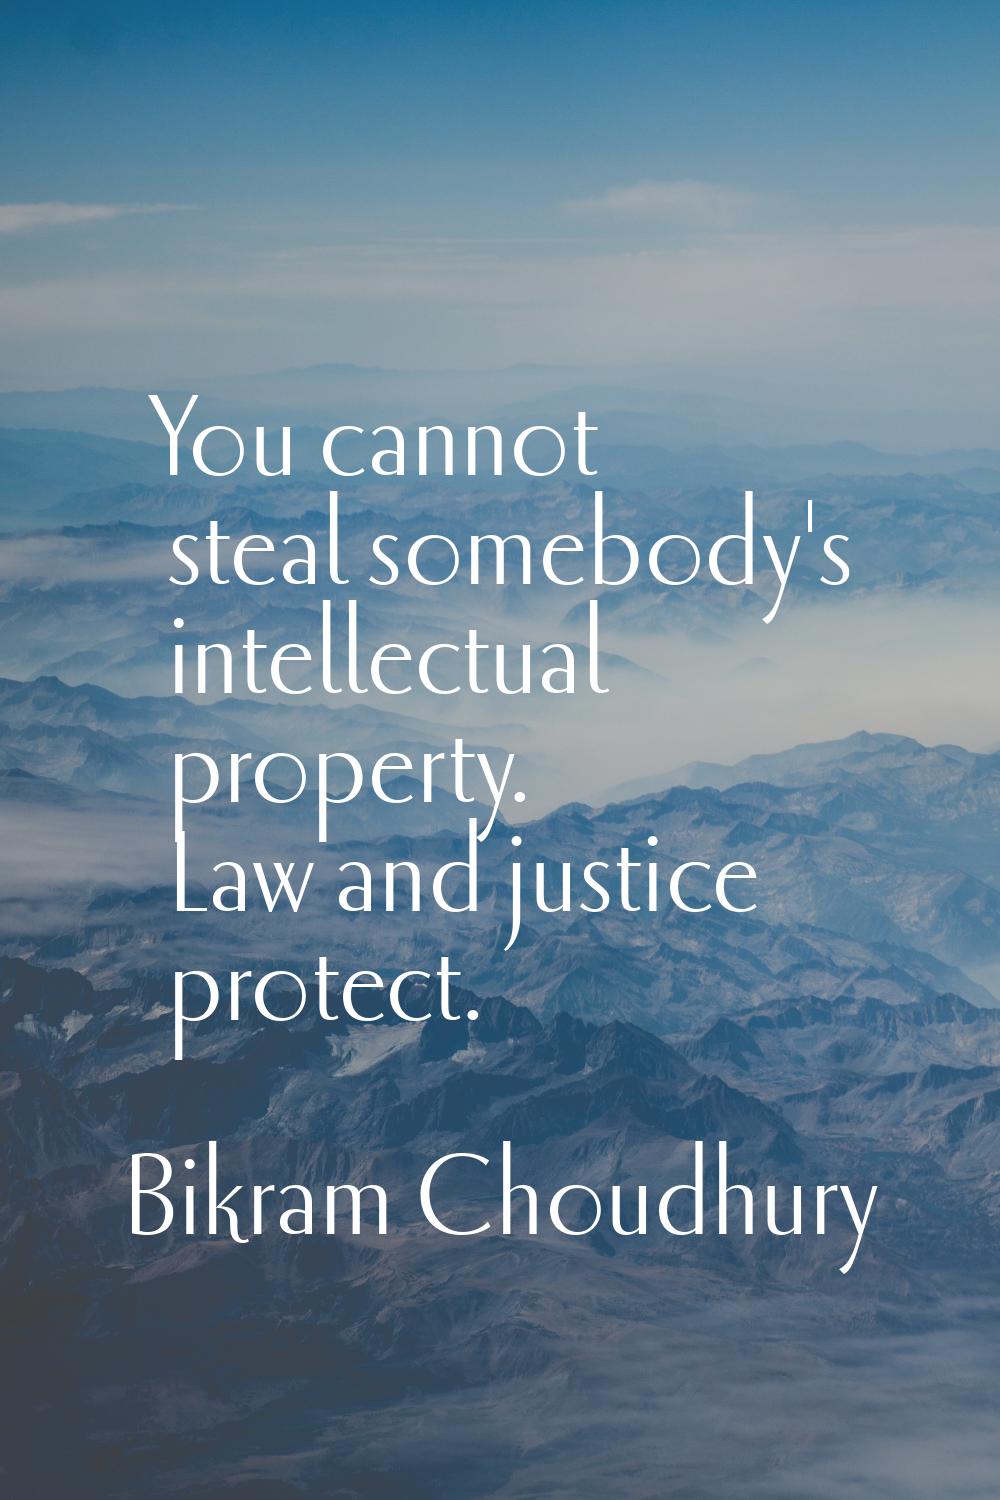 You cannot steal somebody's intellectual property. Law and justice protect.